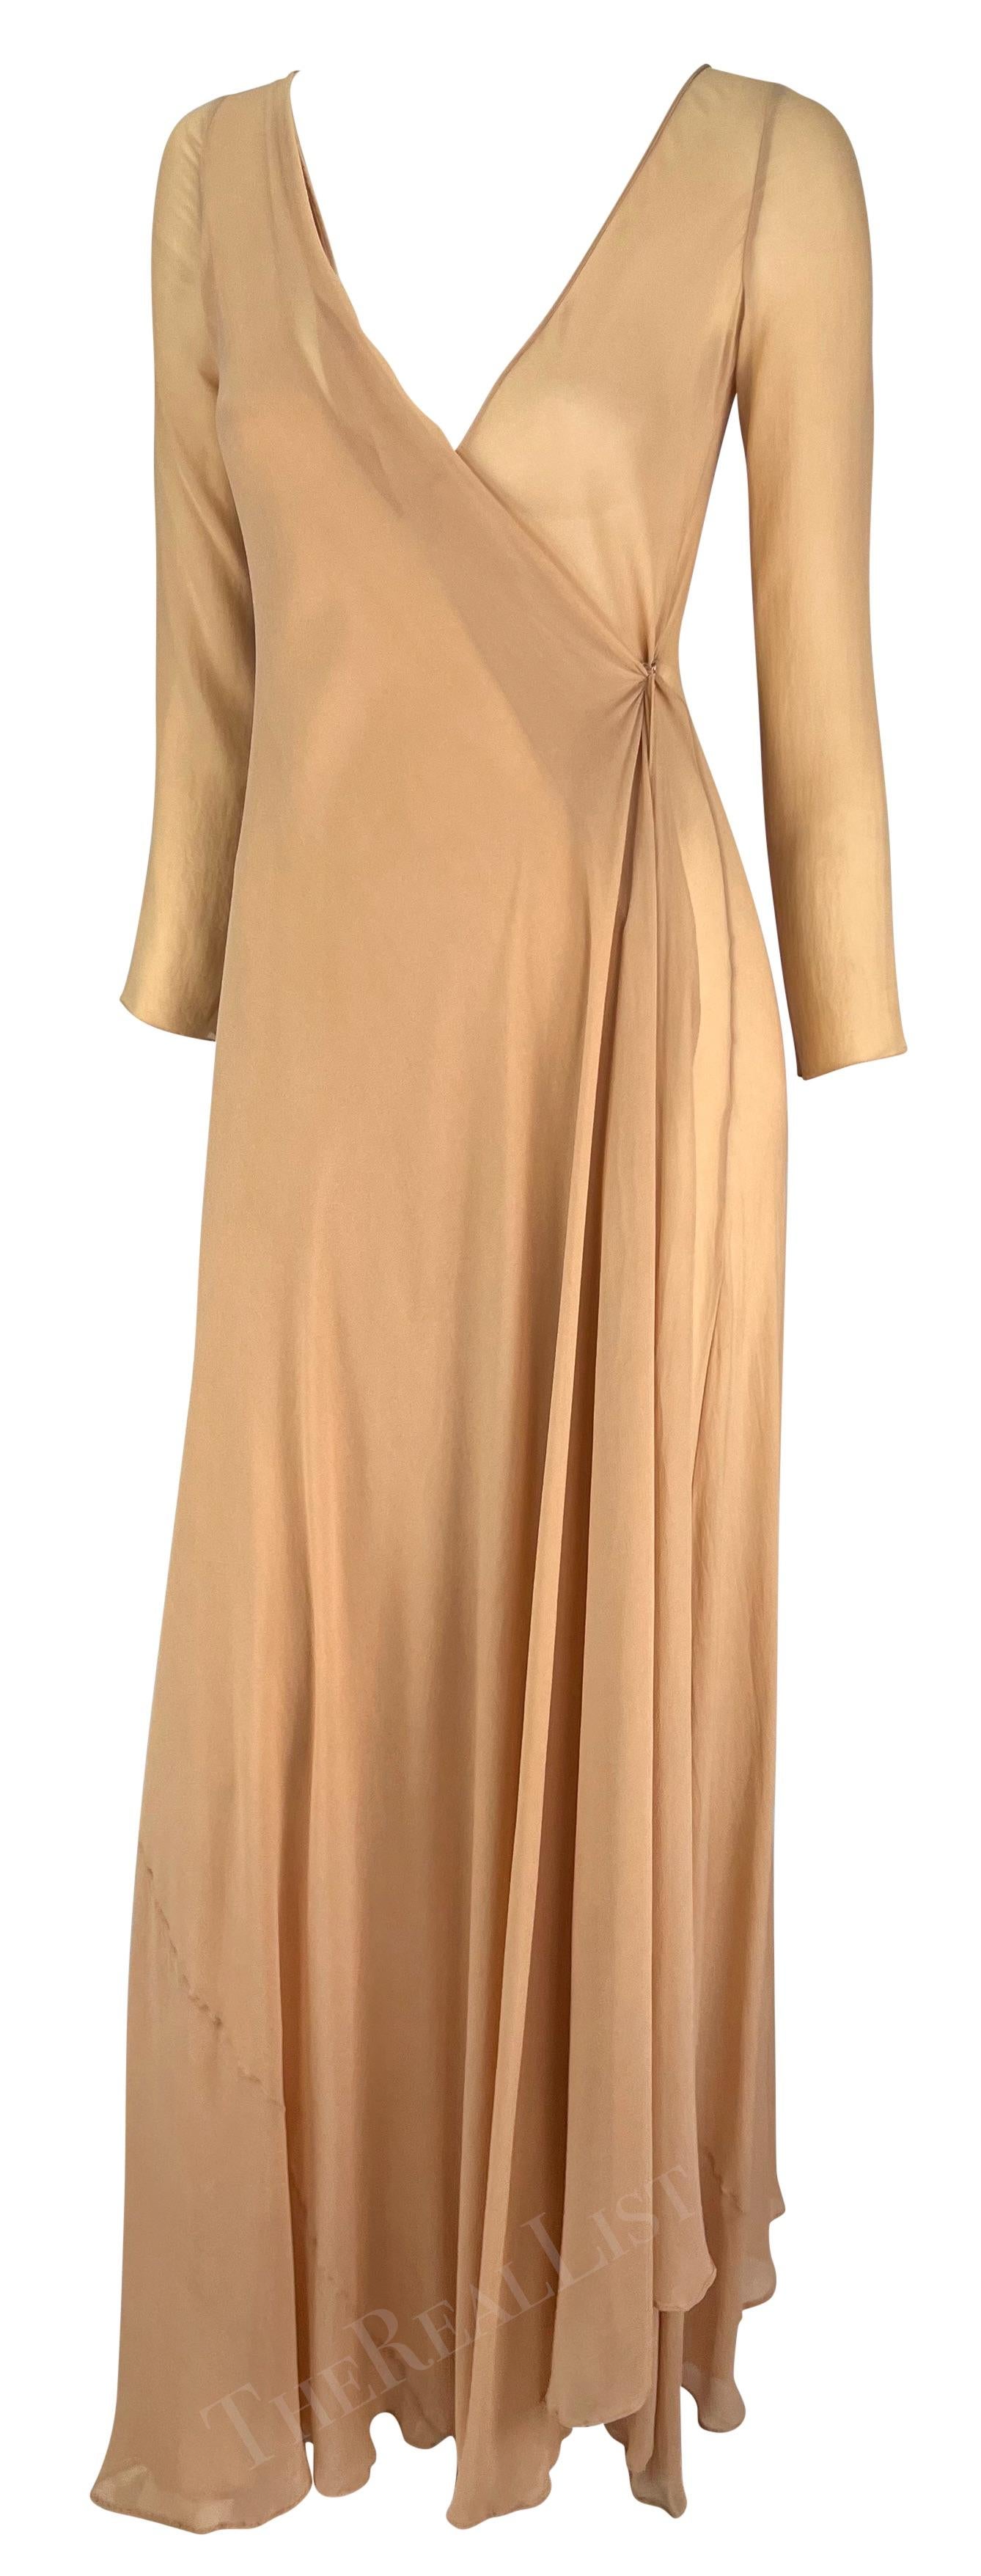 Presenting a stunning beige prototype Gucci wrap gown, designed by Tom Ford. From the Spring/Summer 1998 collection, this elegant gown was produced as a sample. This ultra-rare sample piece is constructed entirely of lightweight sheer chiffon. The